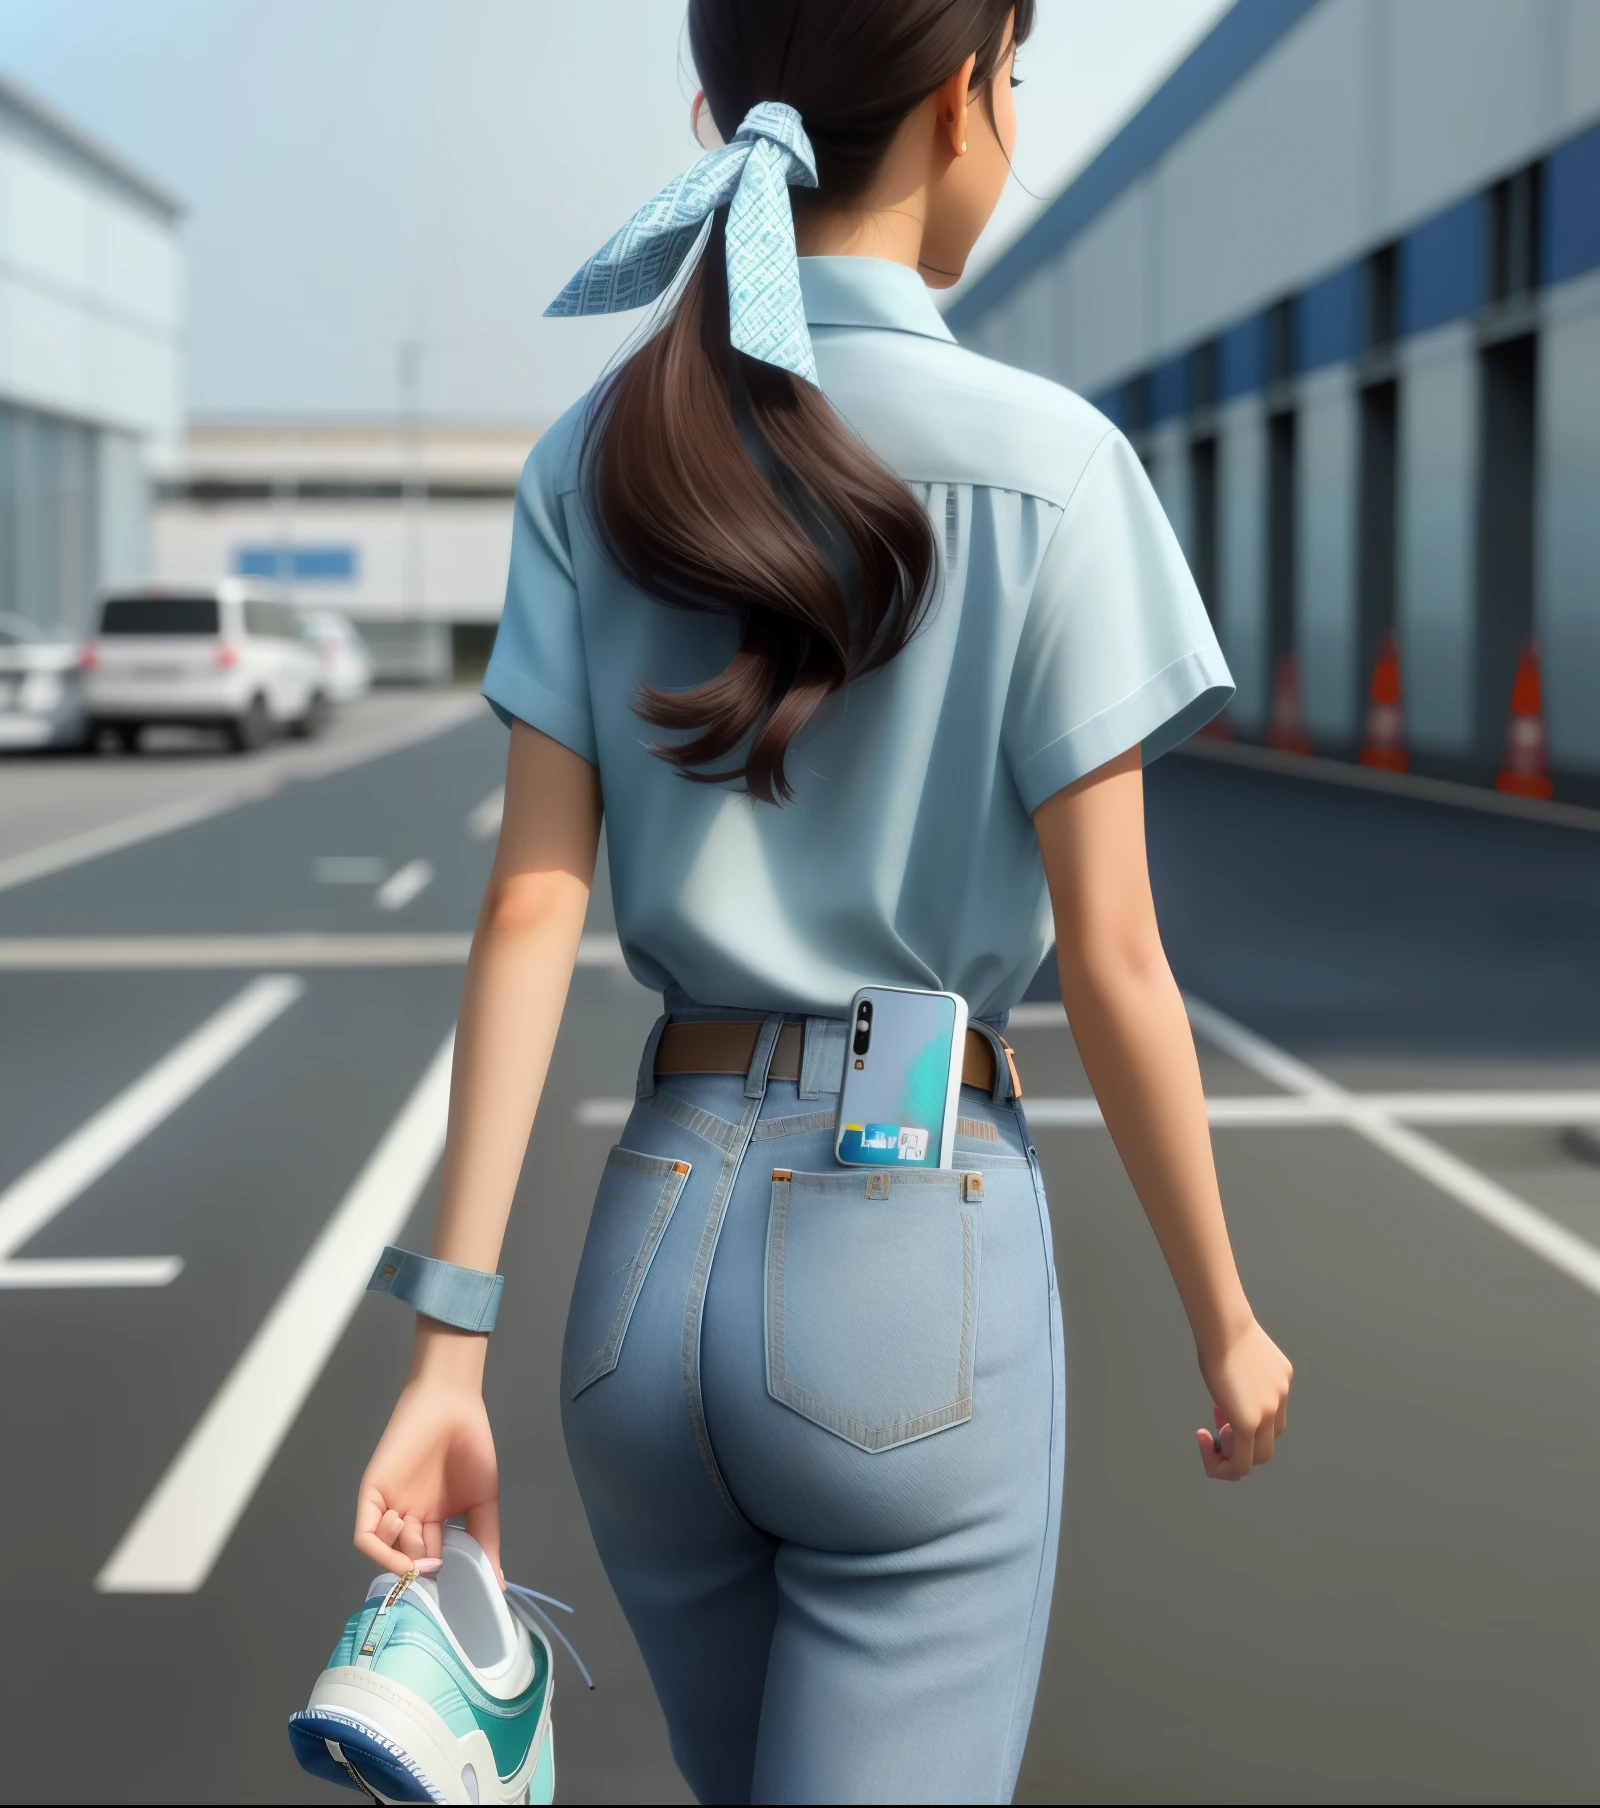 Woven short-sleeved shirt，Factory clothes，Indigo jeans，Graceful and graceful，Field military pants，Half-loaded mobile phone exposed from hip pocket，short ponytail，Youthful female model